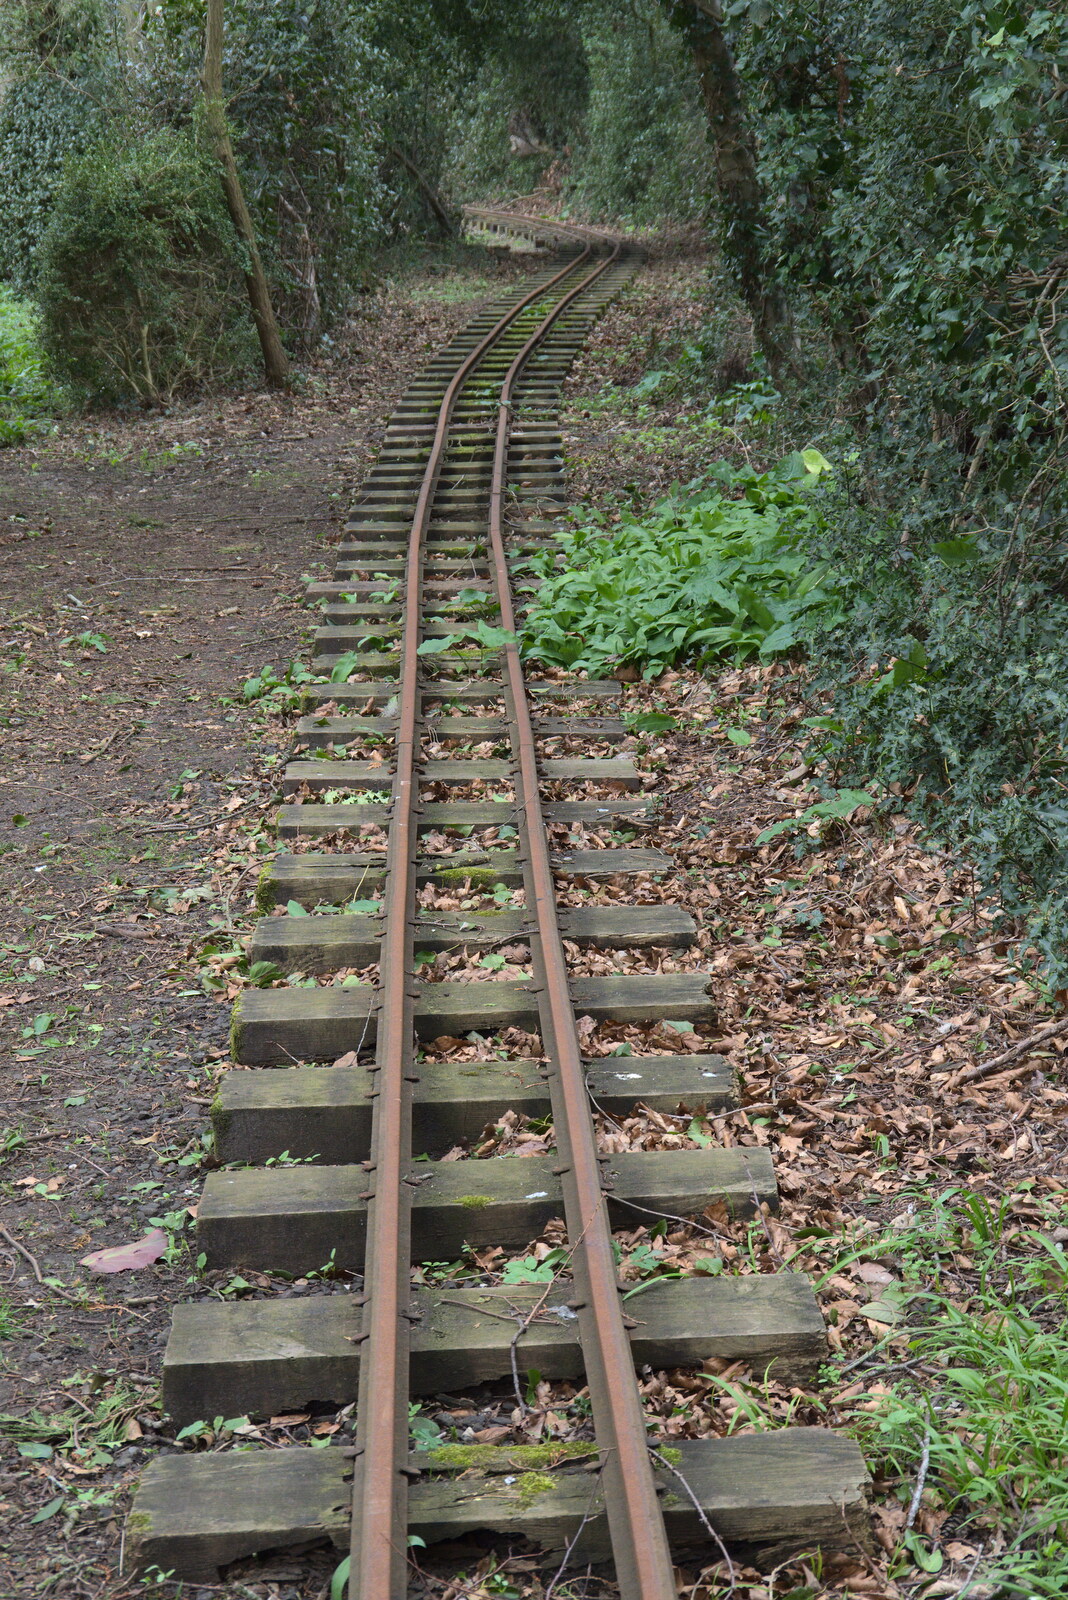 The Garden Line railway from A Return to Bressingham Steam and Gardens, Bressingham, Norfolk - 28th March 2021